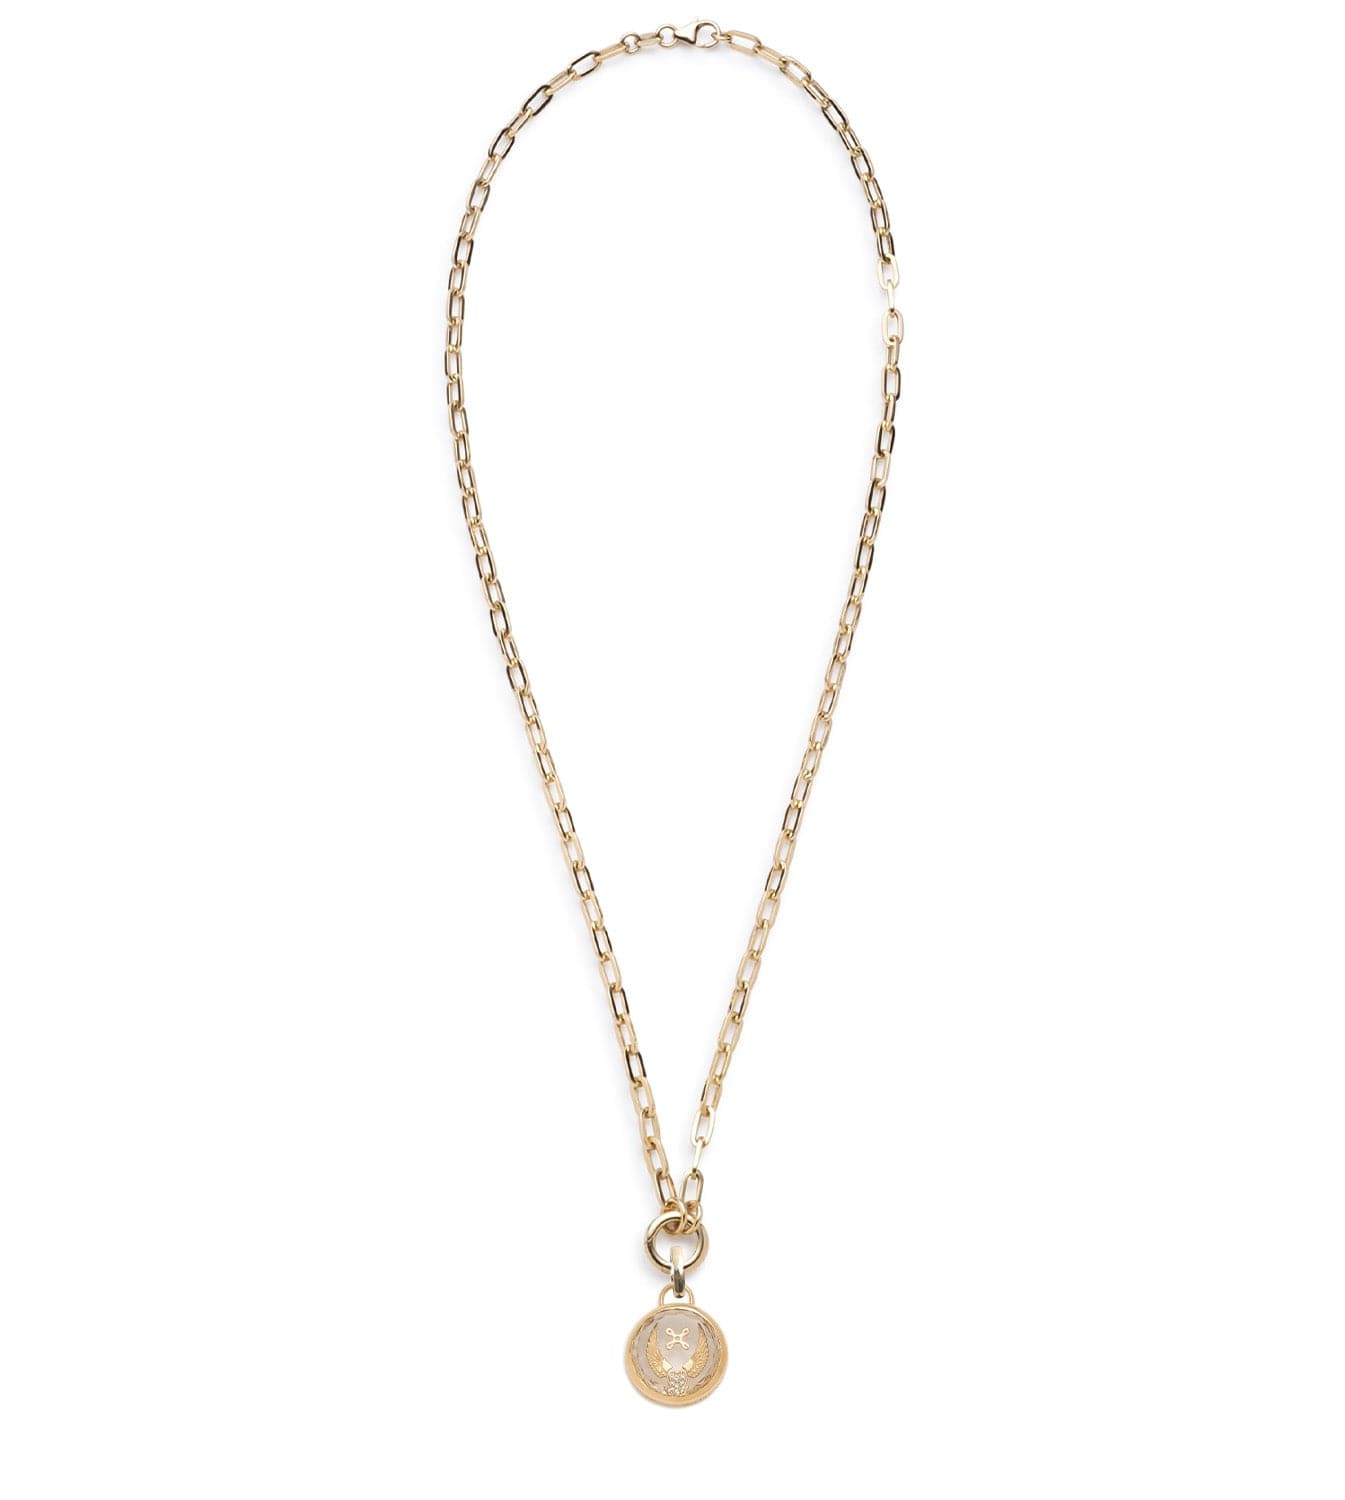 Beloved, With Wings We Fly - Love & Vivacity : Sealed Gemstone Refined Clip Open Chain Necklace